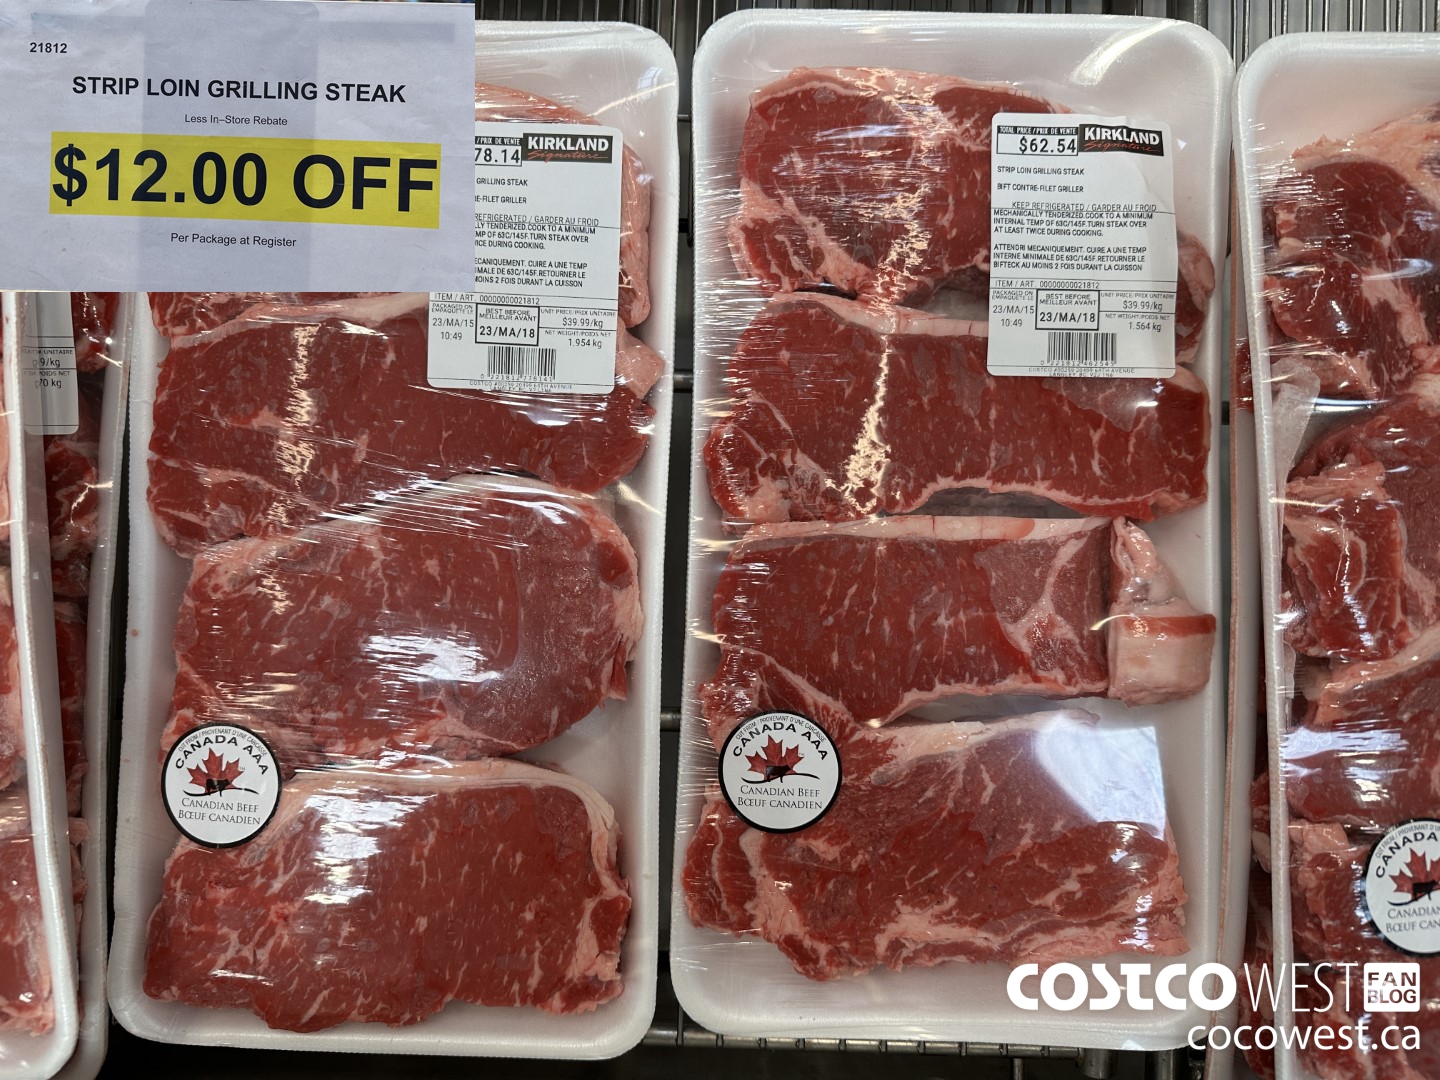 Canada Ungraded Tomahawk - Beef & Veal - Meat & Seafood  FREE Delivery, NO  minimum for Groceries Purchased at COSTCO BUSINESS CENTRE.